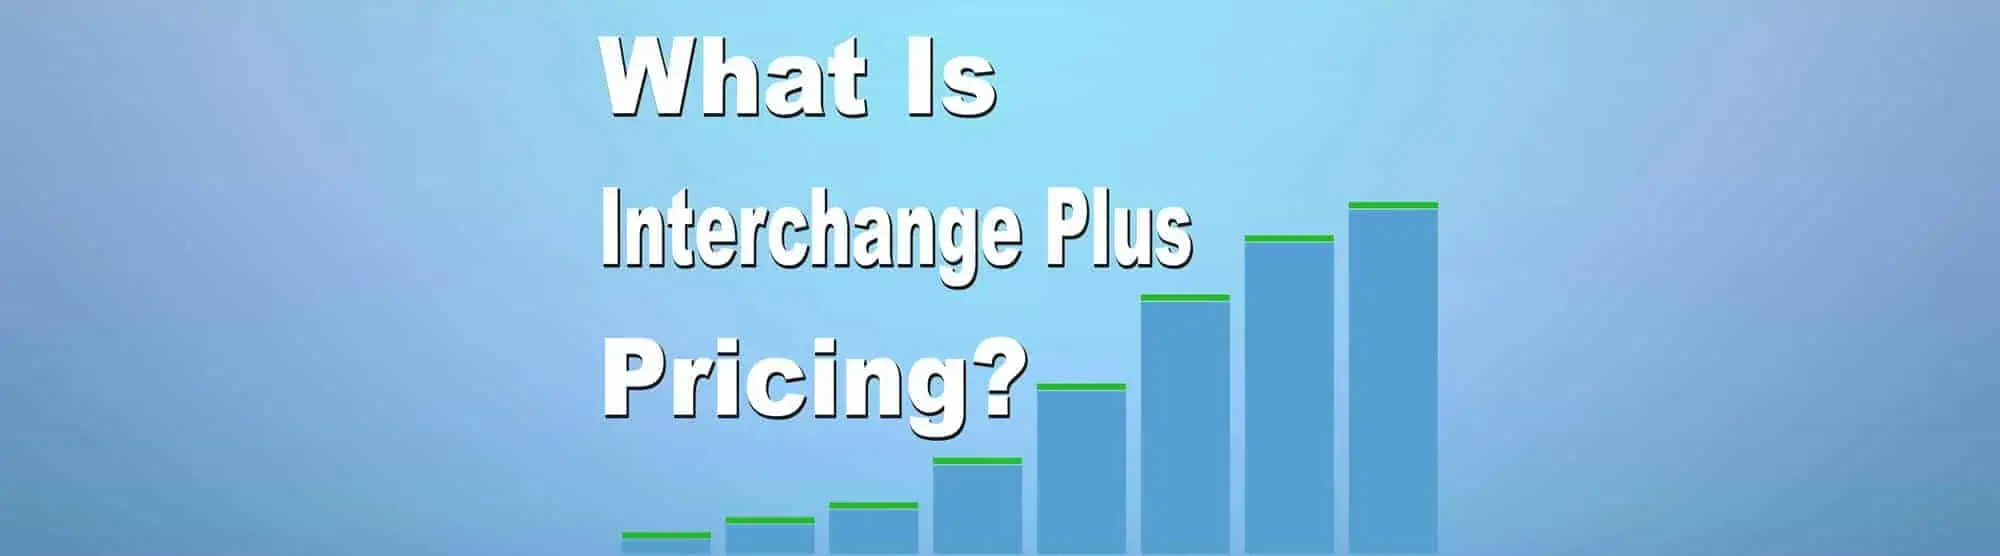 What is Interchange Plus Pricing